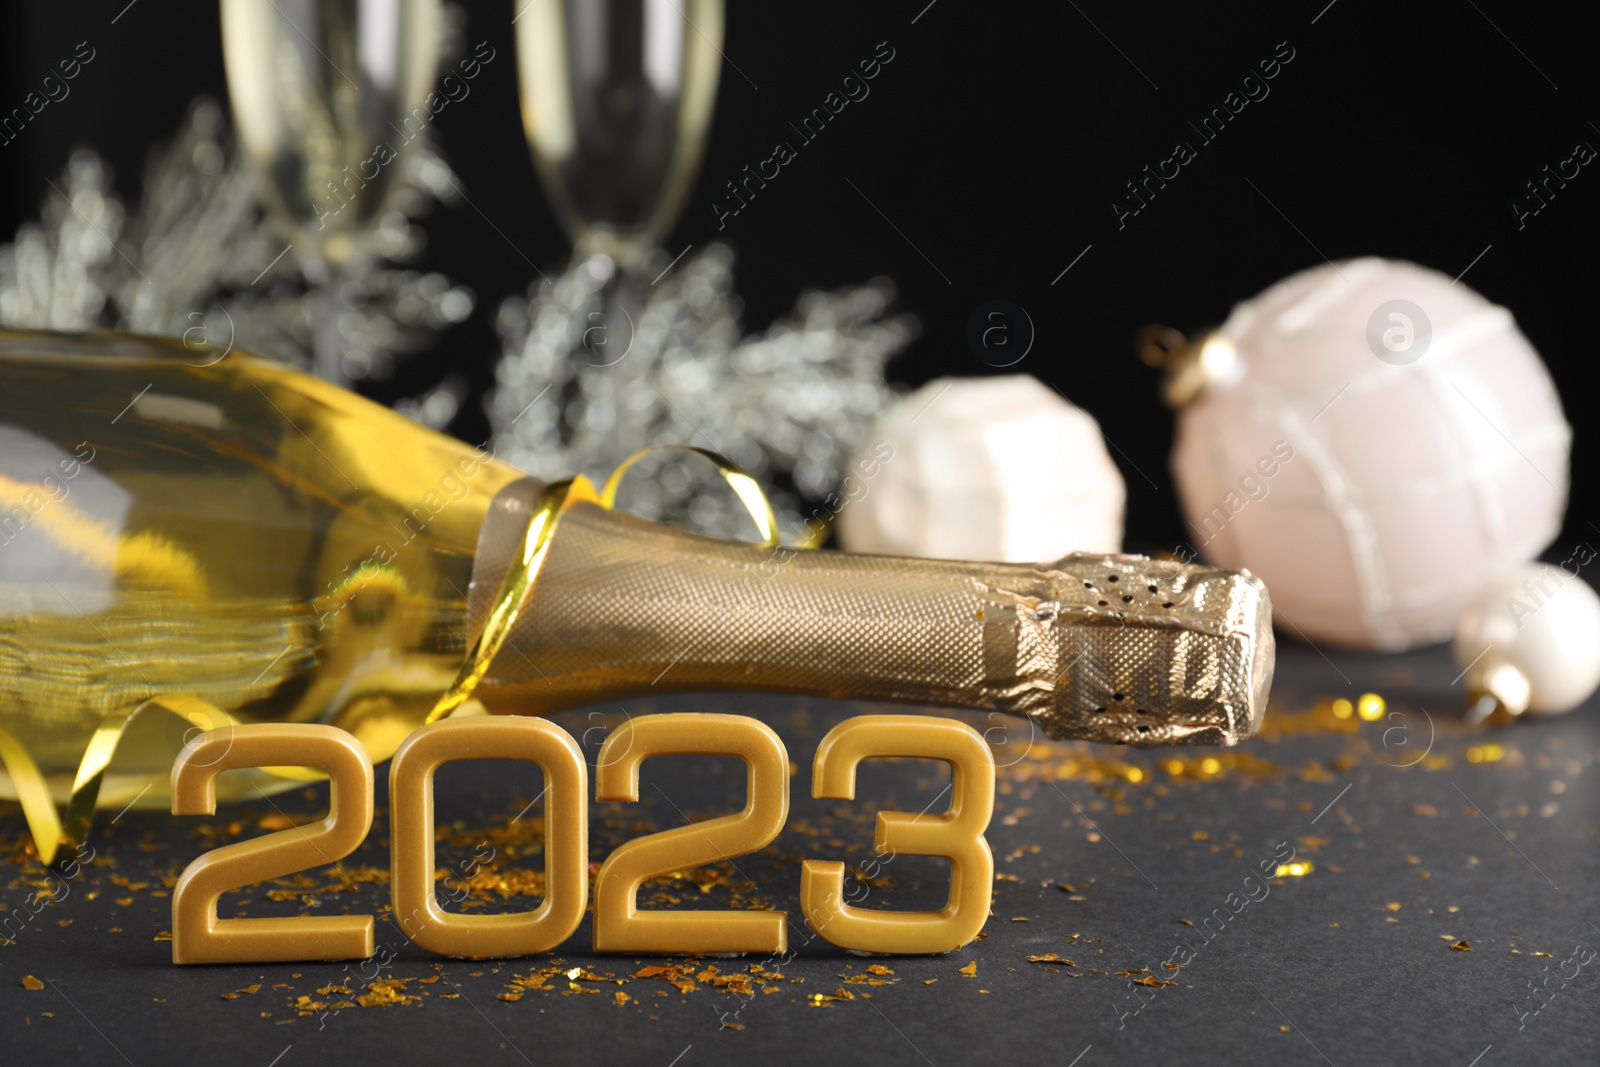 Photo of Happy New Year 2023! Bottle of sparkling wine and festive decor on table against black background